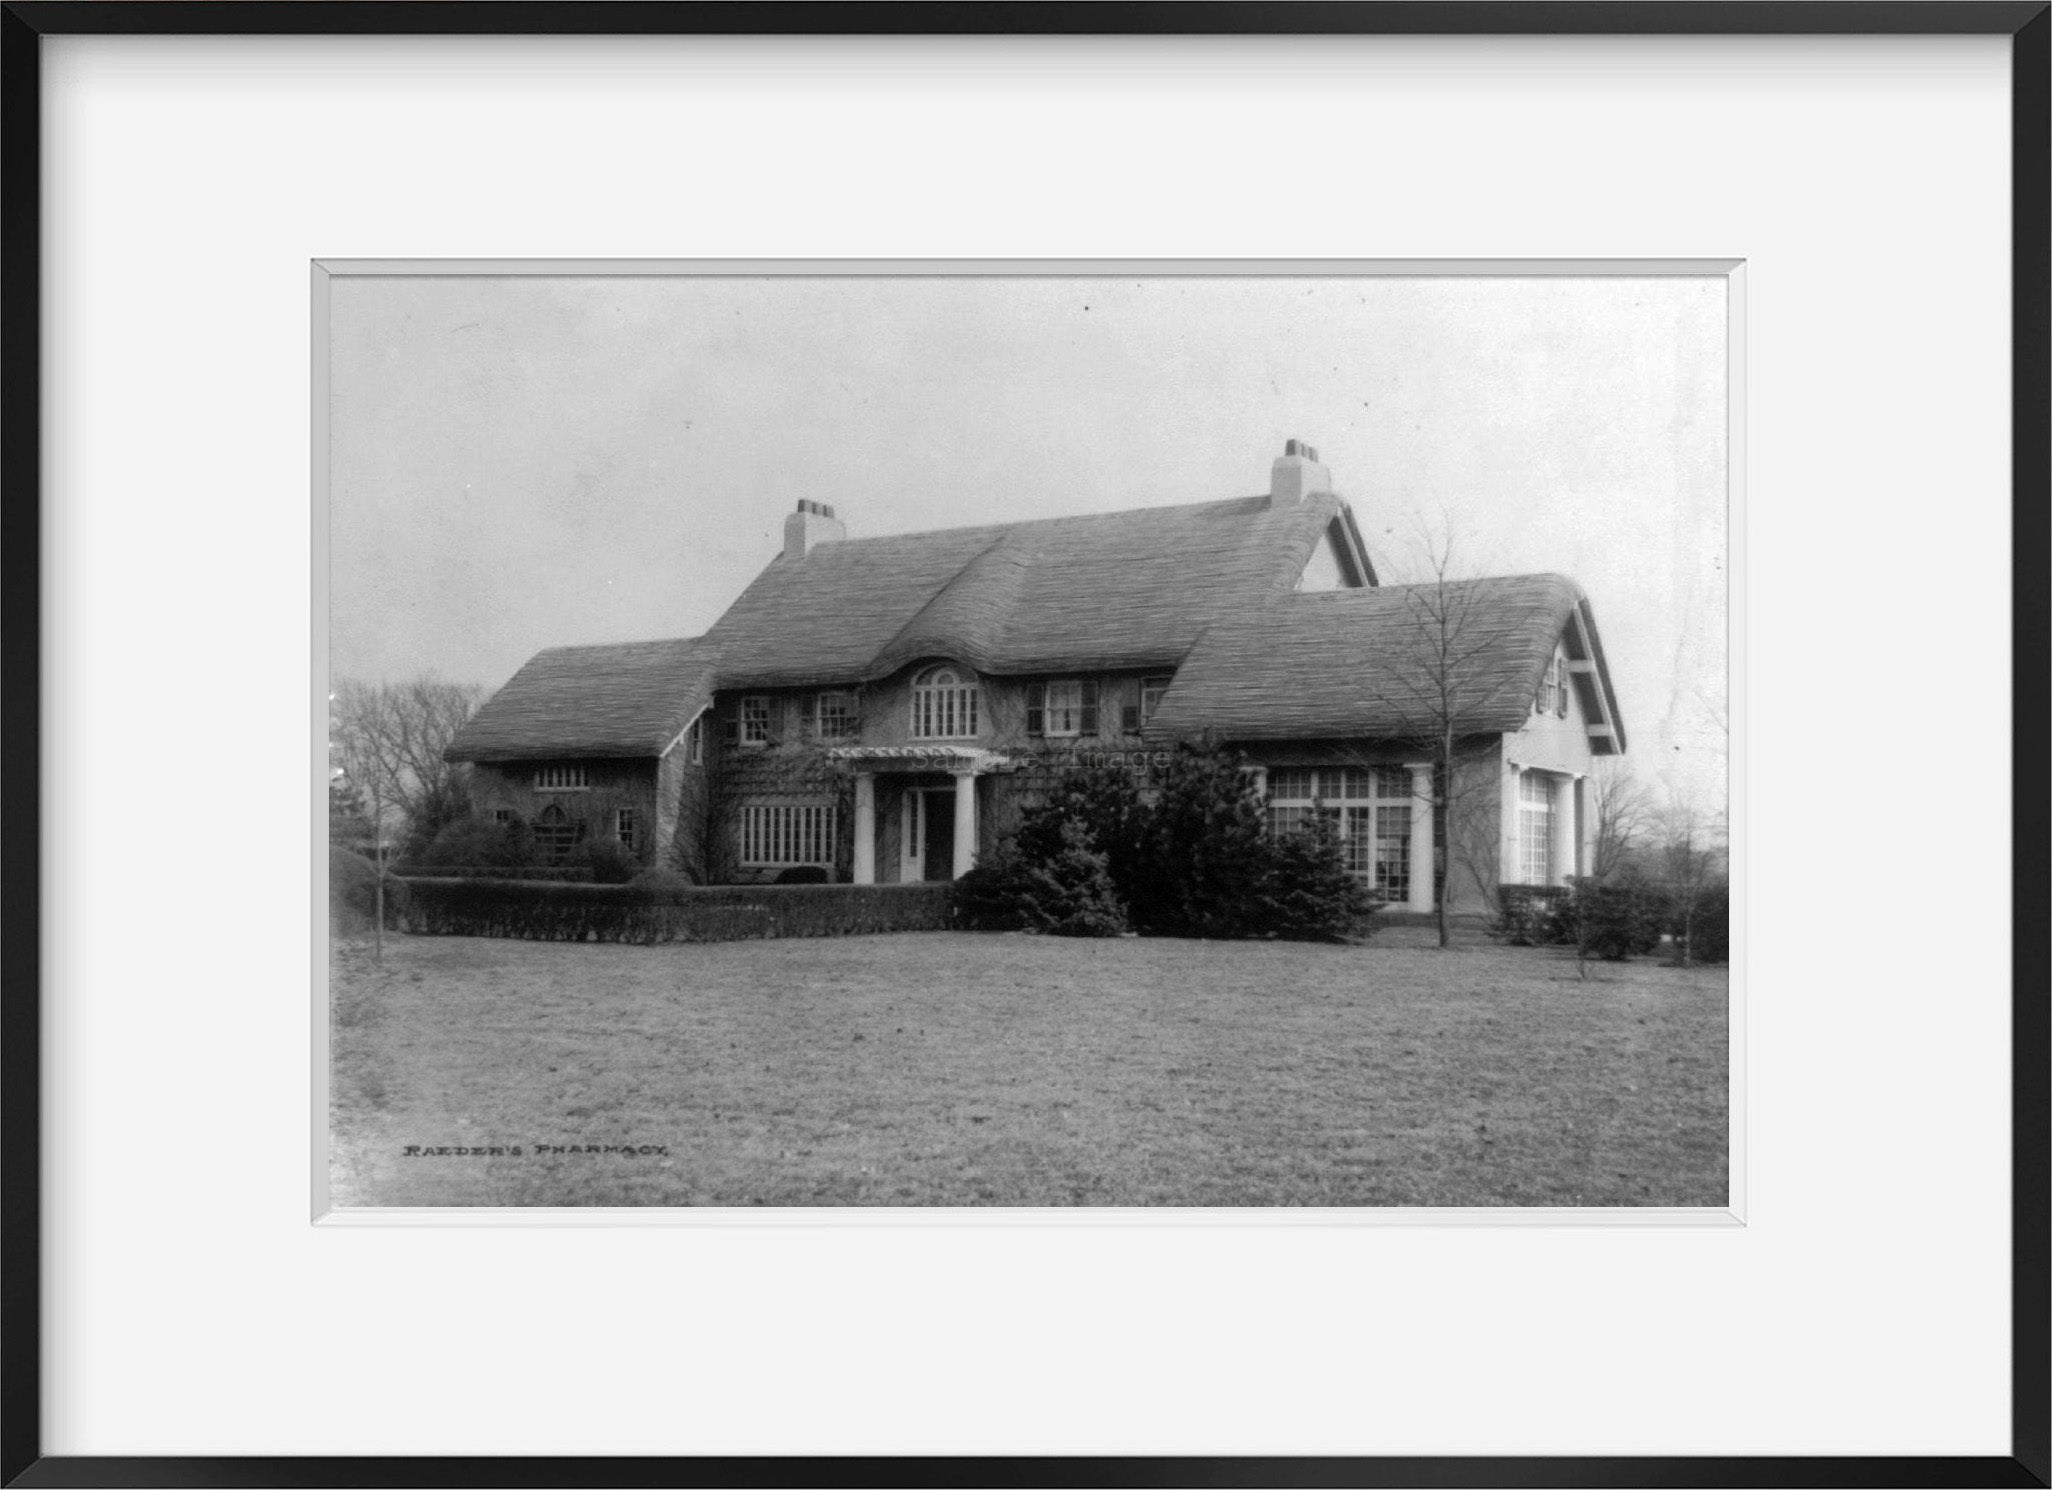 Photograph of House with simulated thatched roofing, Cedarhurst, Long Island, Ne